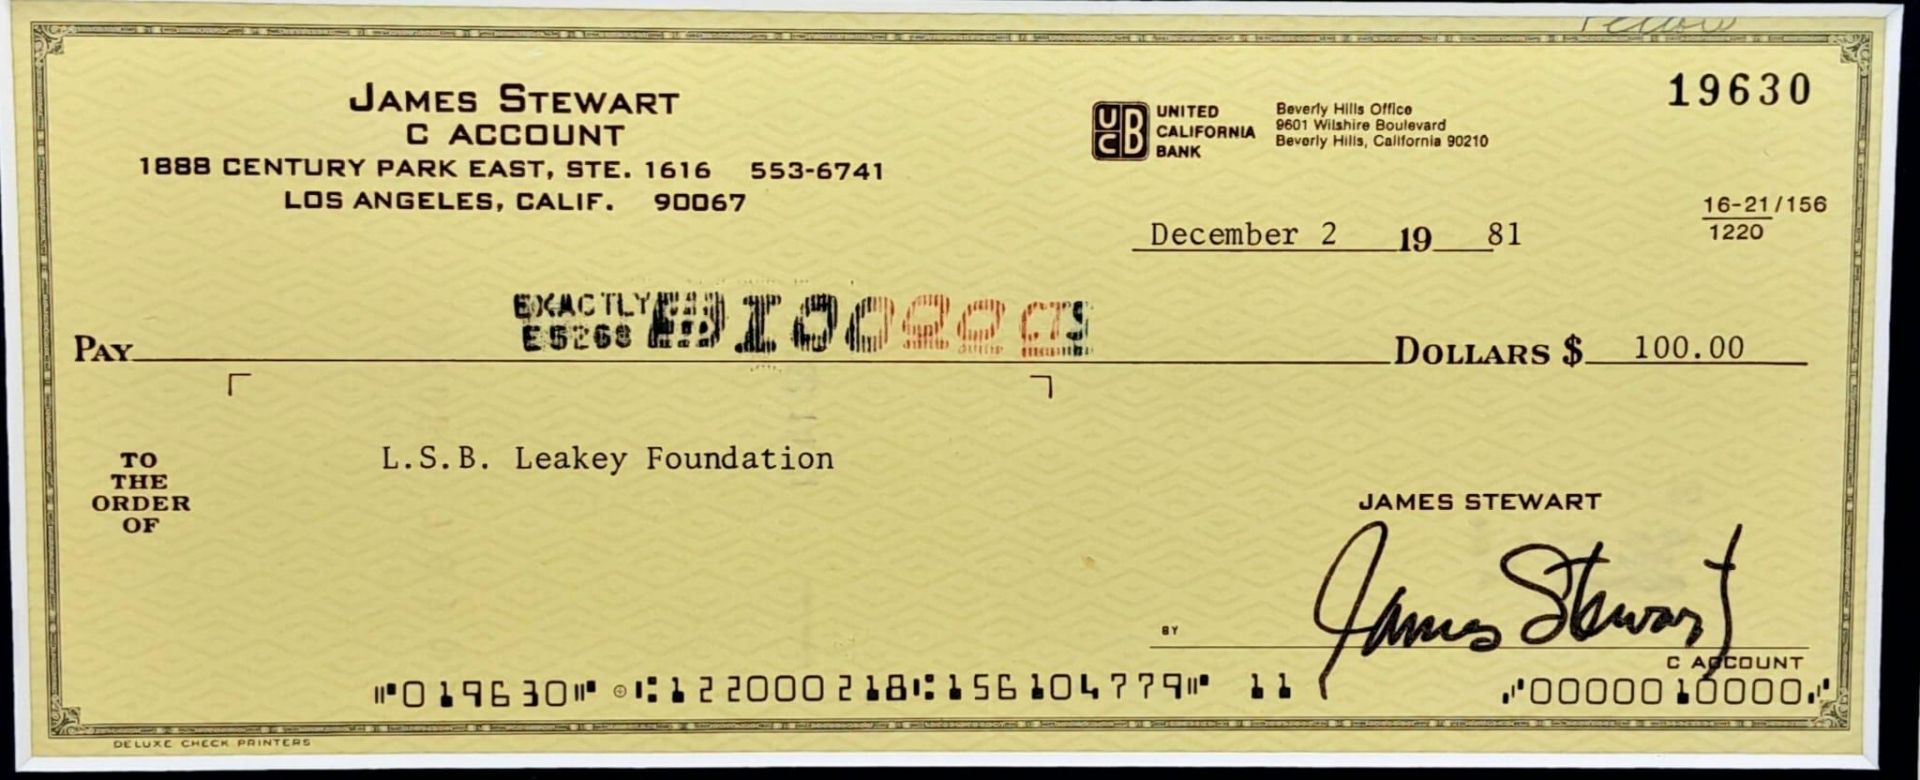 A PHOTO OF JIMMY STEWART AND THE FAMOUS WHITE RABBIT "HARVEY" WITH A SIGNED CHEQUE FROM HIS PERSONAL - Image 3 of 4